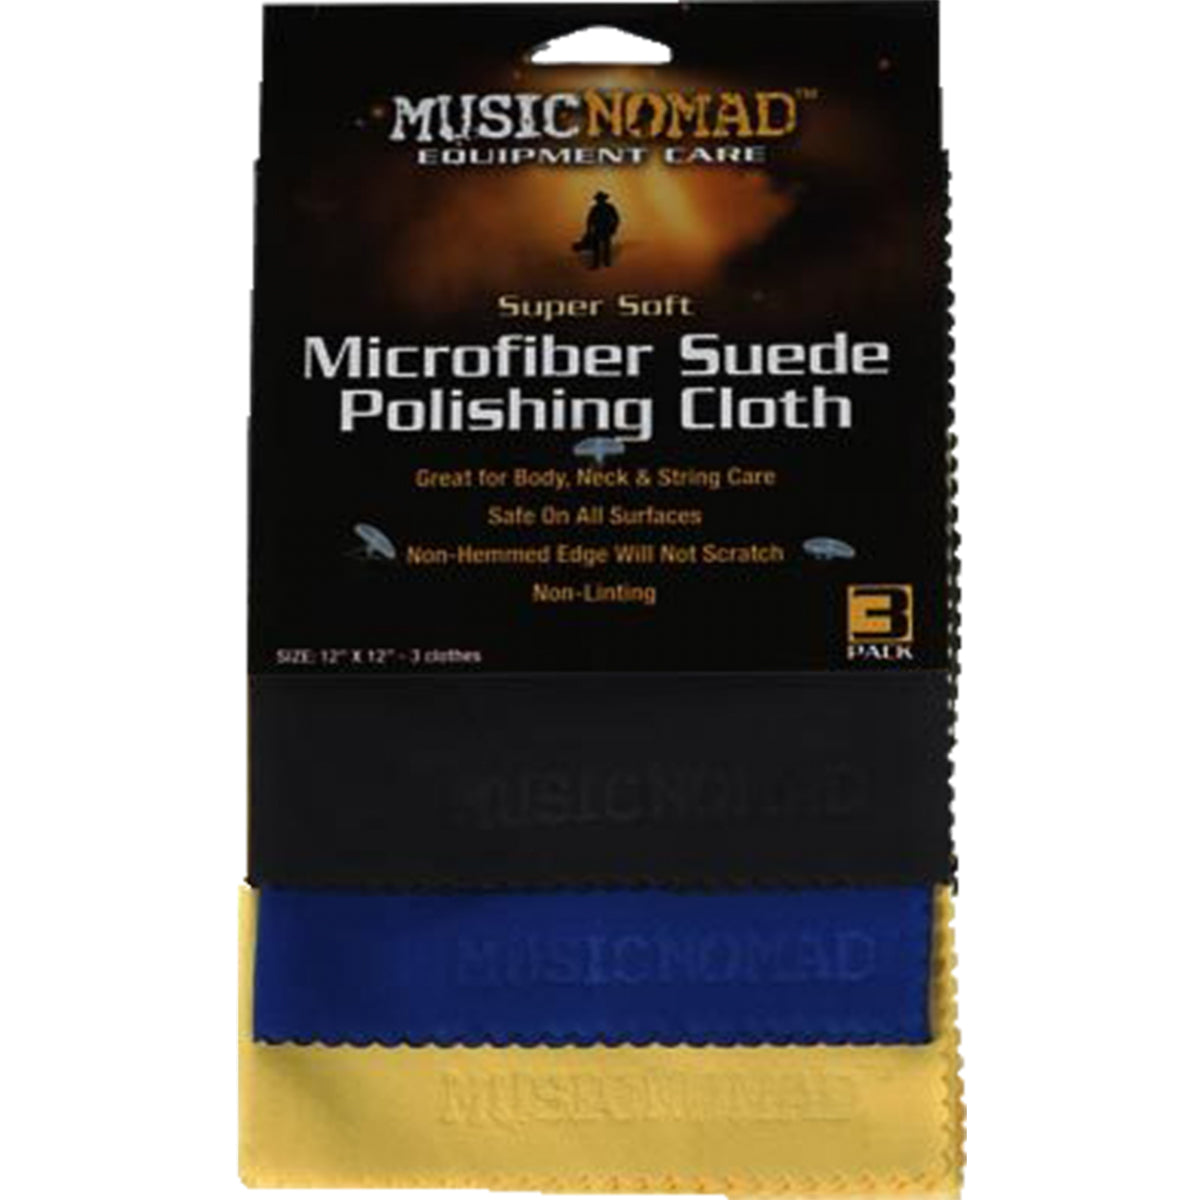 Music Nomad MN203 Super Soft Microfiber Suede Polishing Cloth - 3 Pack